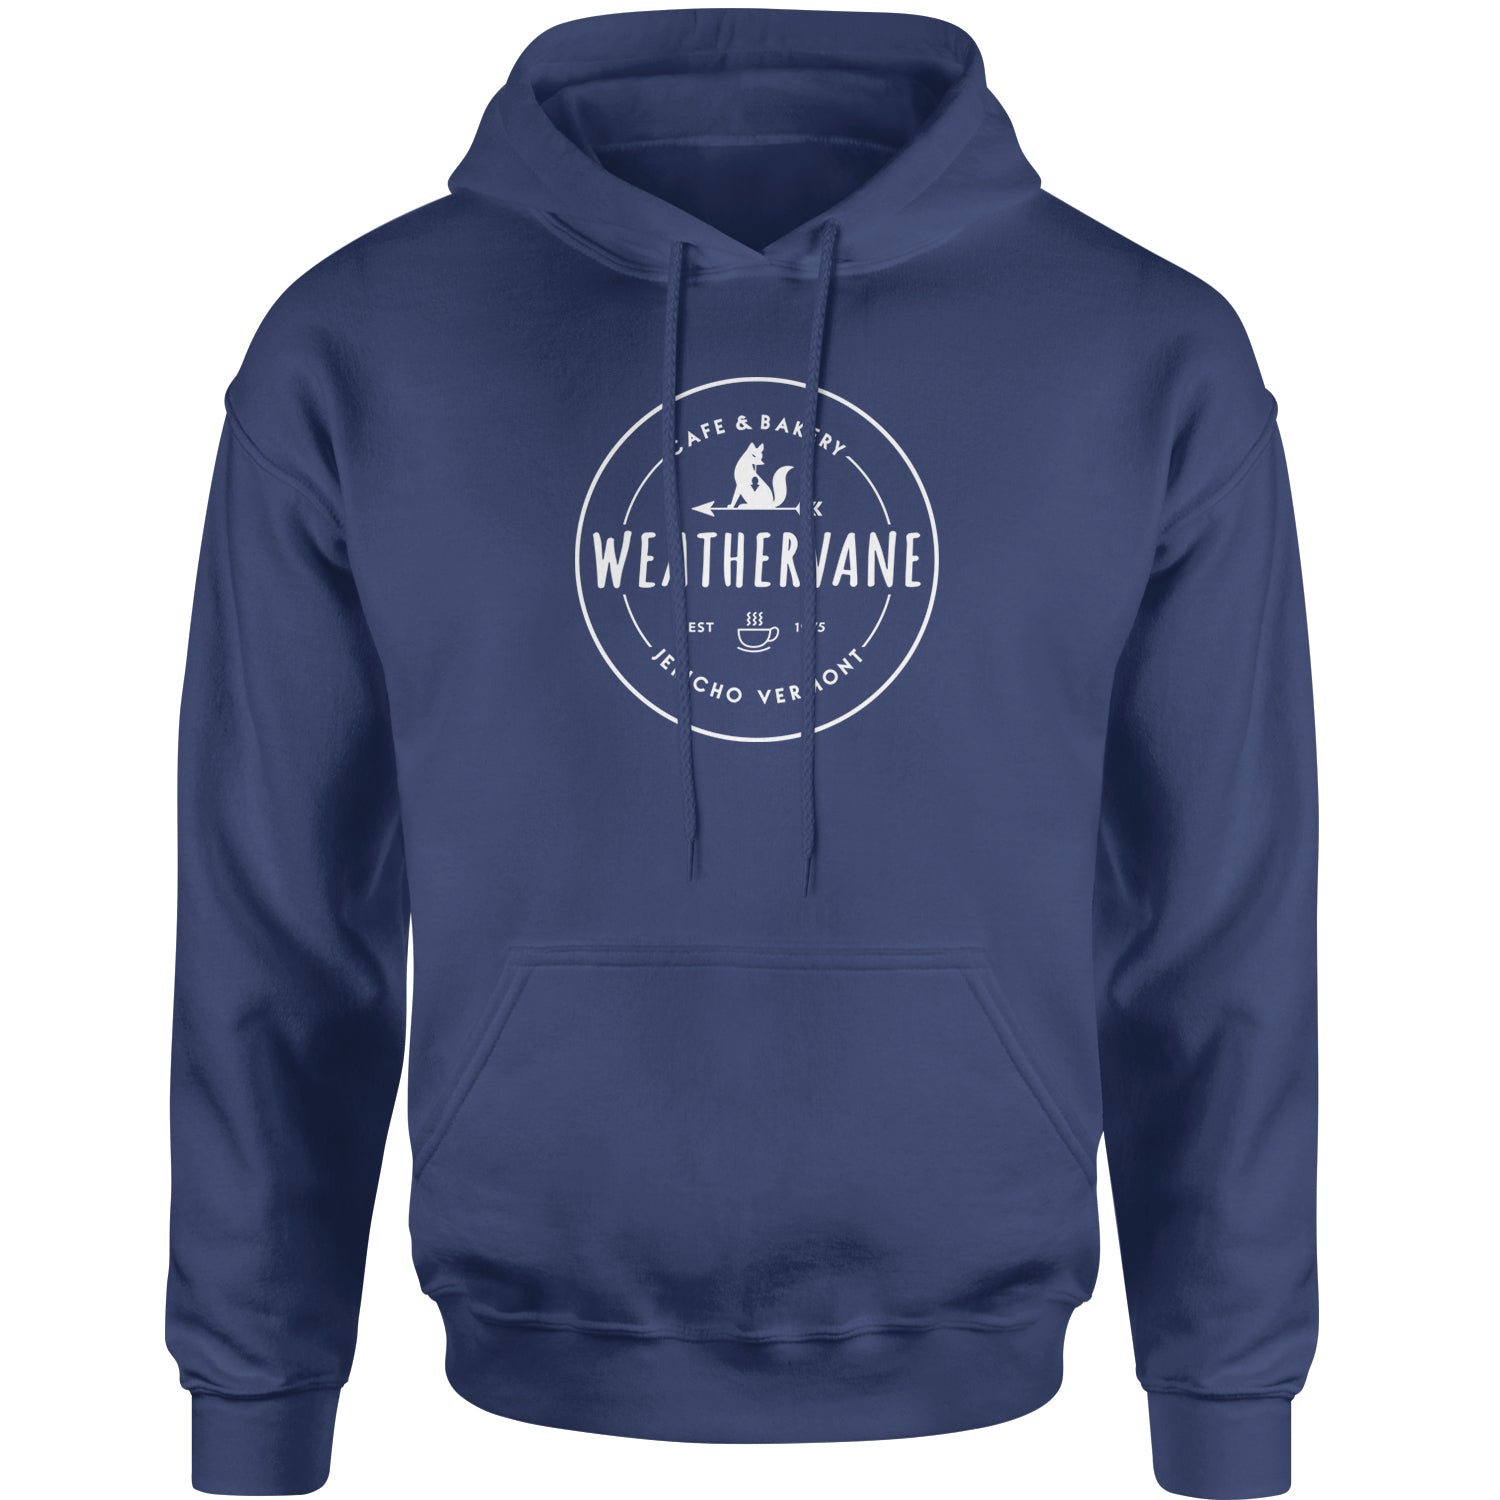 Weathervane Coffee Shop Adult Hoodie Sweatshirt academy, jericho, more, never, vermont, Wednesday by Expression Tees